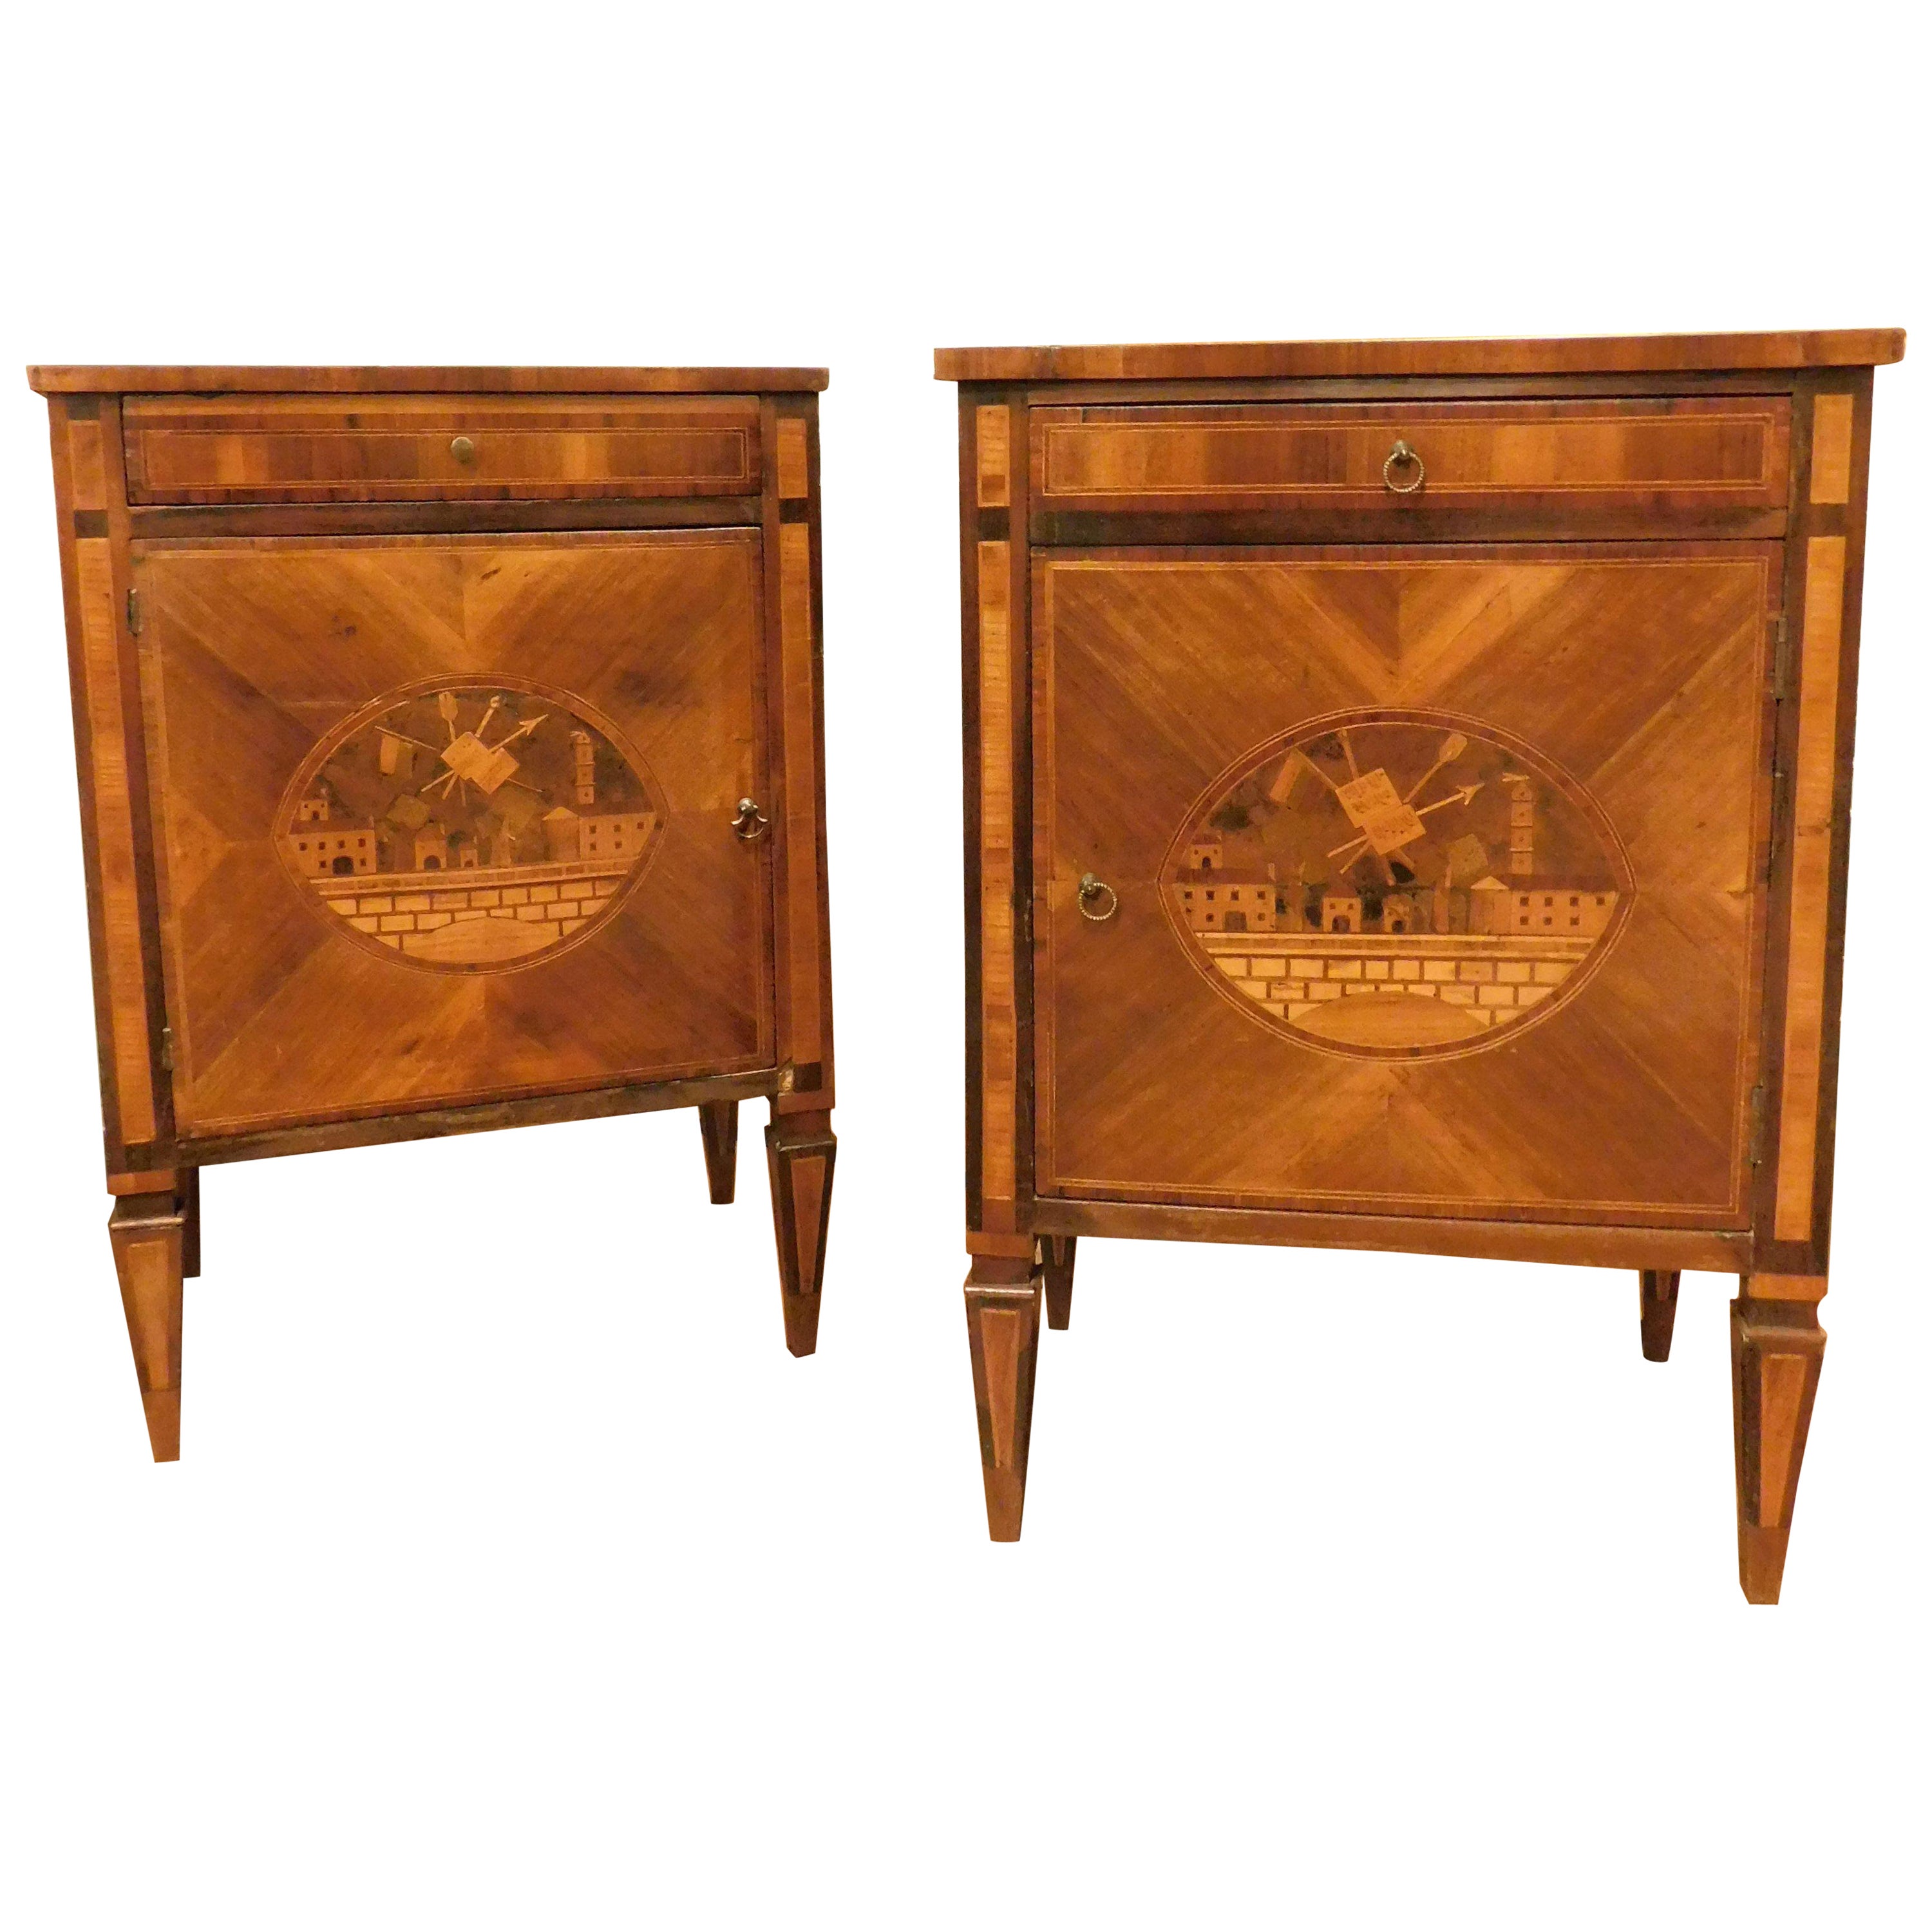 Pair of Walnut and Boxwood Veneered Bedside Tables, 18th Century, Italy